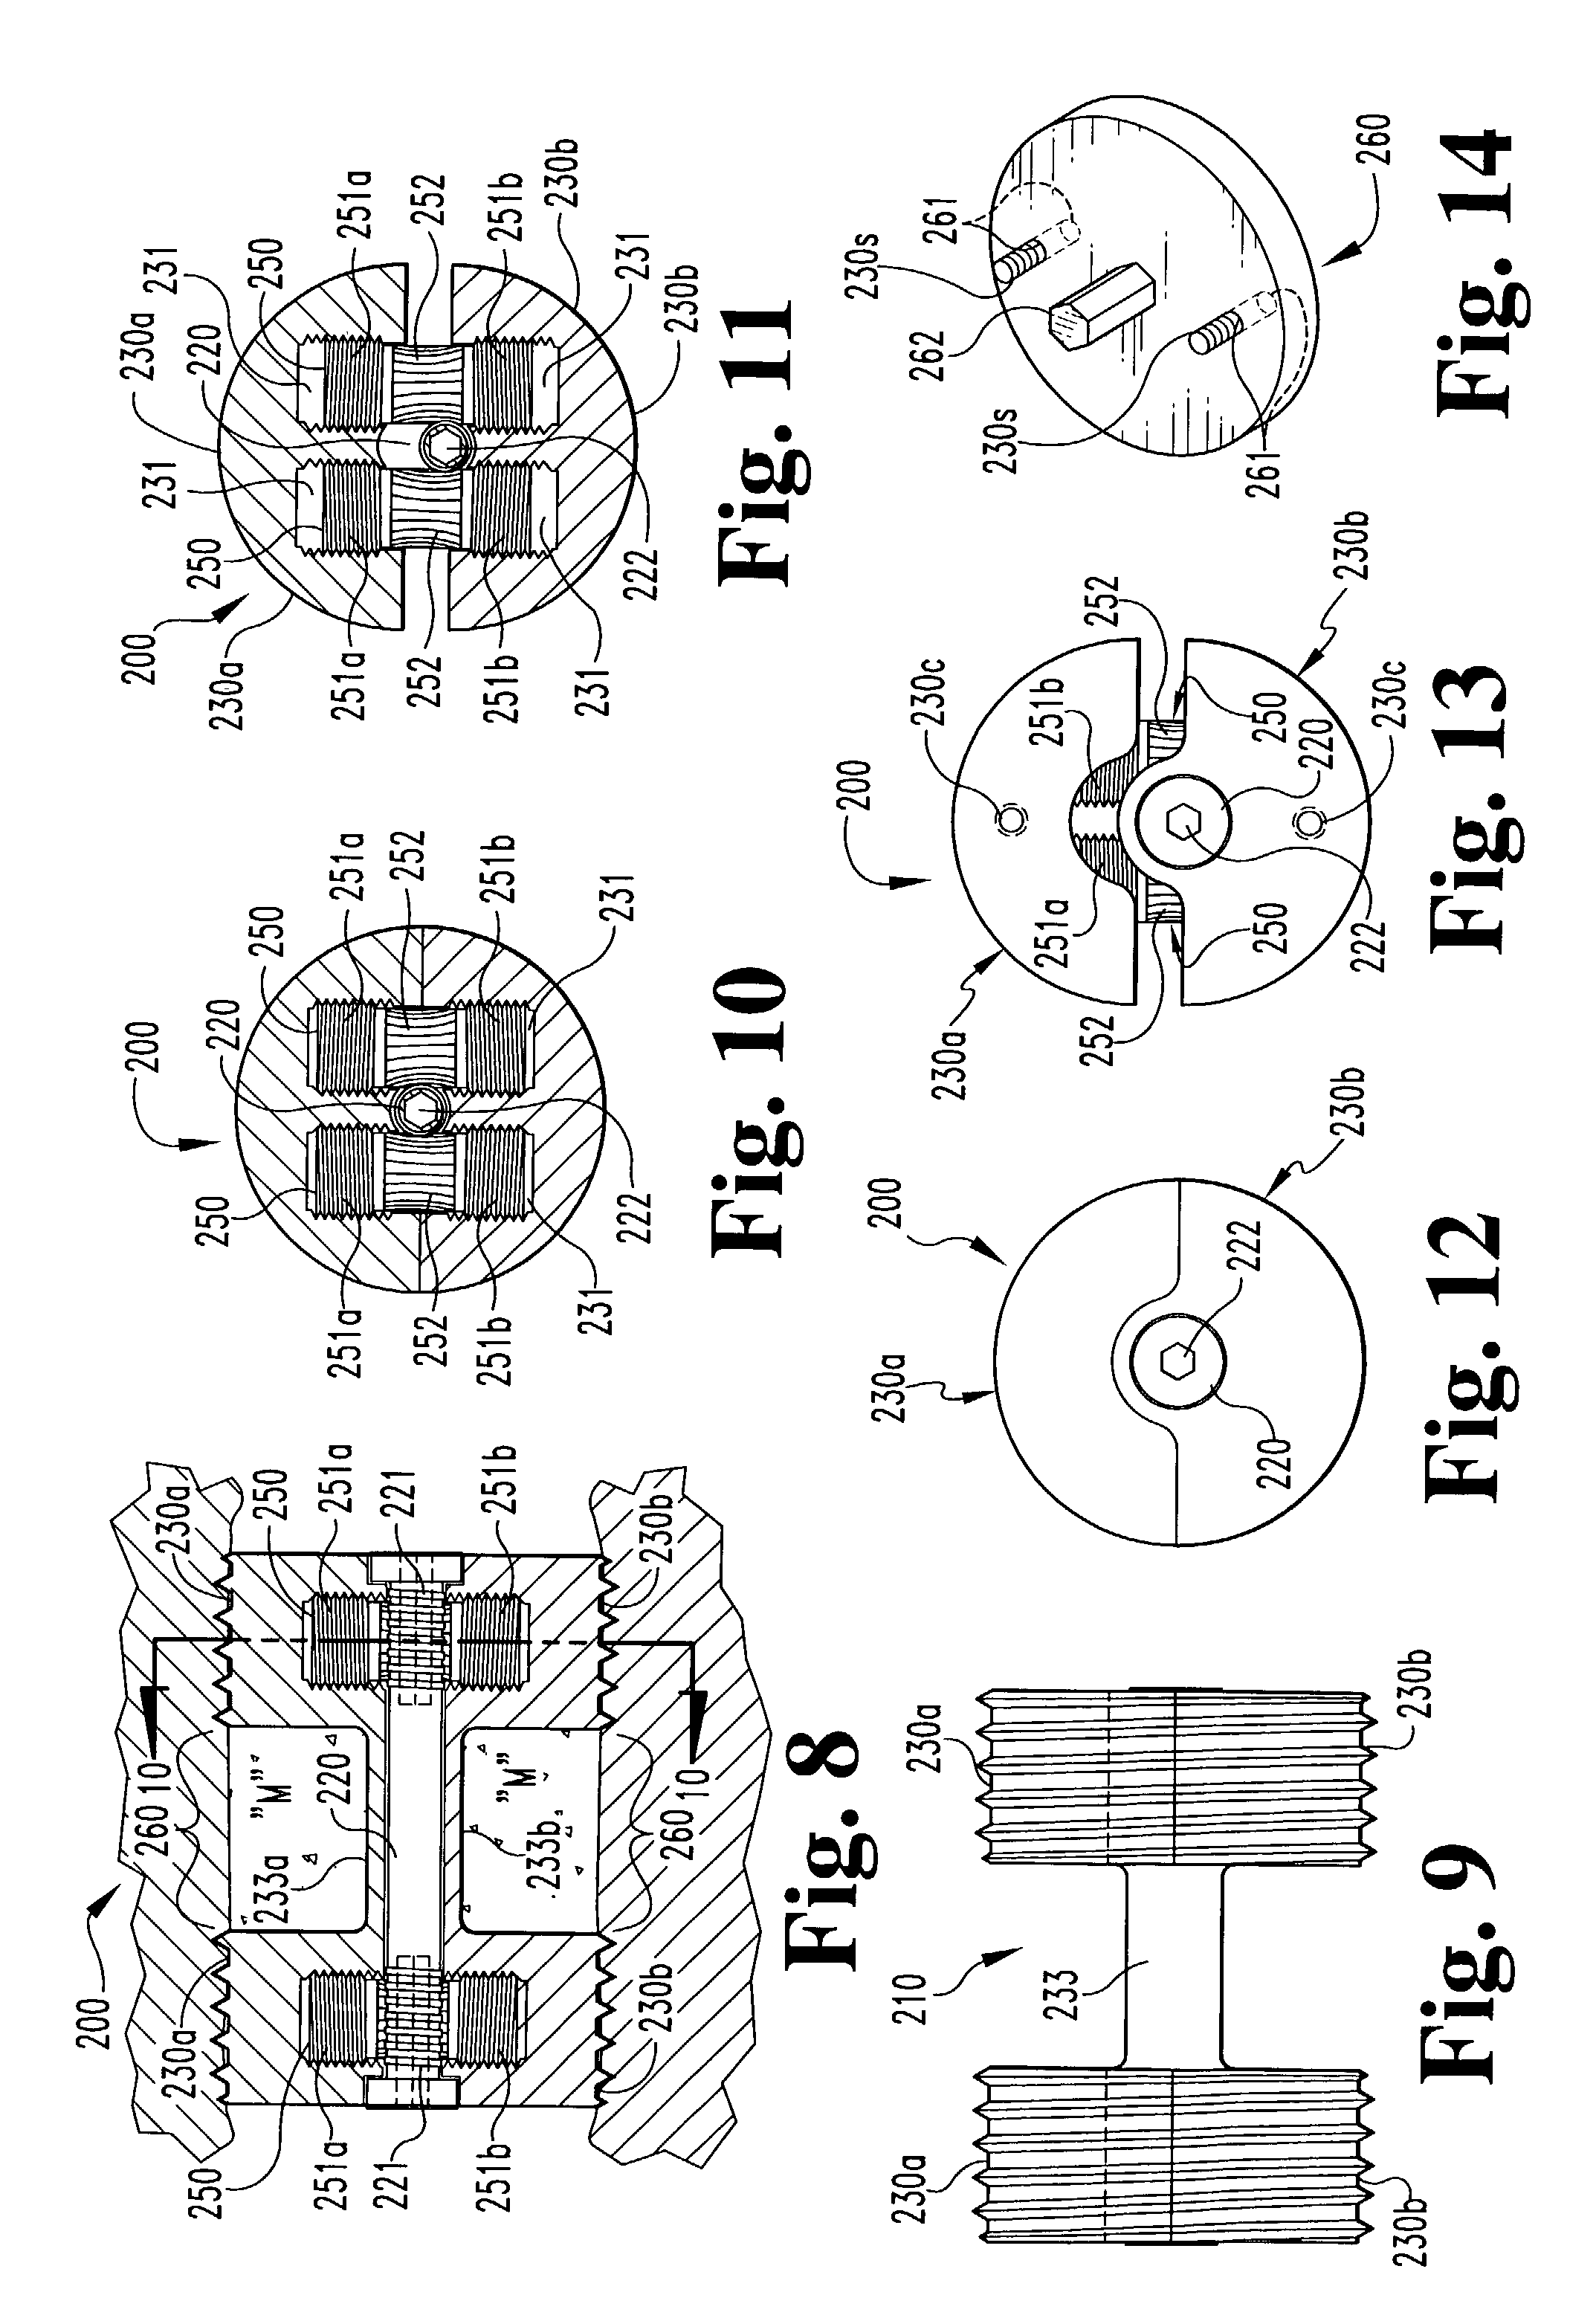 Expandable spinal fusion device and methods of promoting spinal fusion